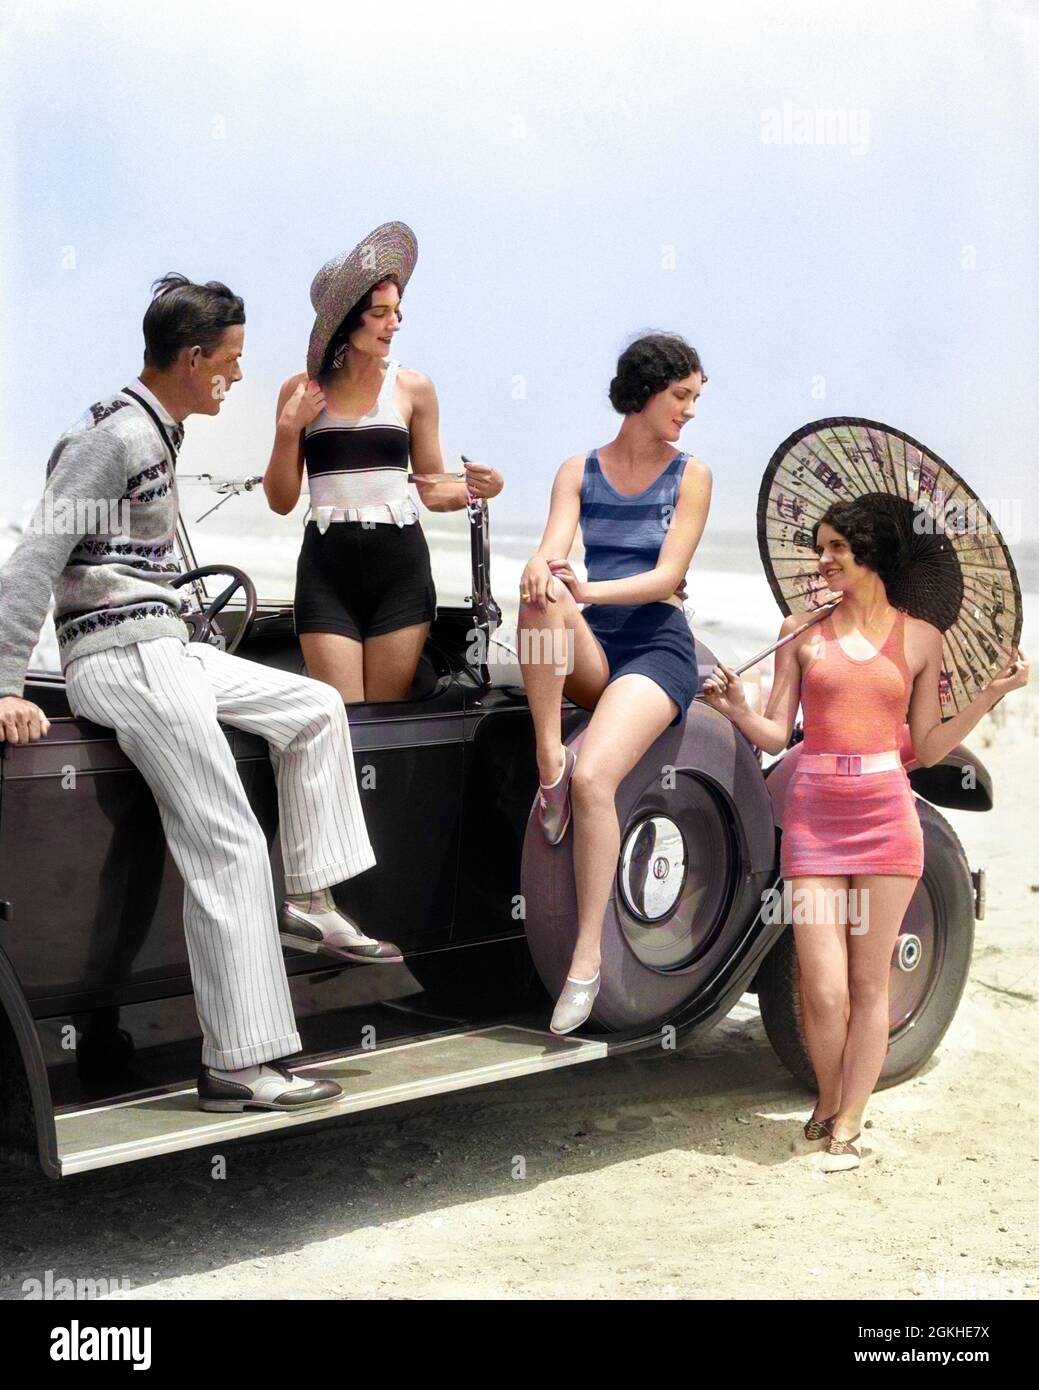 1920s MAN AND THREE WOMEN IN BEACH CLOTHES OR BATHING SUITS POSING AROUND CAR ON RUNNING BOARD AT SEASHORE - m2785c HAR001 HARS COLOR SOCIAL OLD TIME NOSTALGIA RUNNER GOOD OLD FASHION AUTO SISTER 1 FITNESS STYLE MOTOR BATHING VEHICLE YOUNG ADULT SUITS VACATION WEST FIT LIFESTYLE OCEAN FEMALES RURAL GROWNUP TRANSPORT COPY SPACE FULL-LENGTH LADIES PERSONS GROWN-UP AUTOMOBILE MALES SIBLINGS SISTERS TRANSPORTATION TIME OFF STYLES MOTOR VEHICLE PARASOL TRIP AUTOS GETAWAY TRIO HOLIDAYS MOTORING POSING SIBLING SWIM SUIT UPSCALE WEST COAST GOOD HEALTH AUTOMOBILES PACKARD TOURING CAR SANDY STYLISH Stock Photo